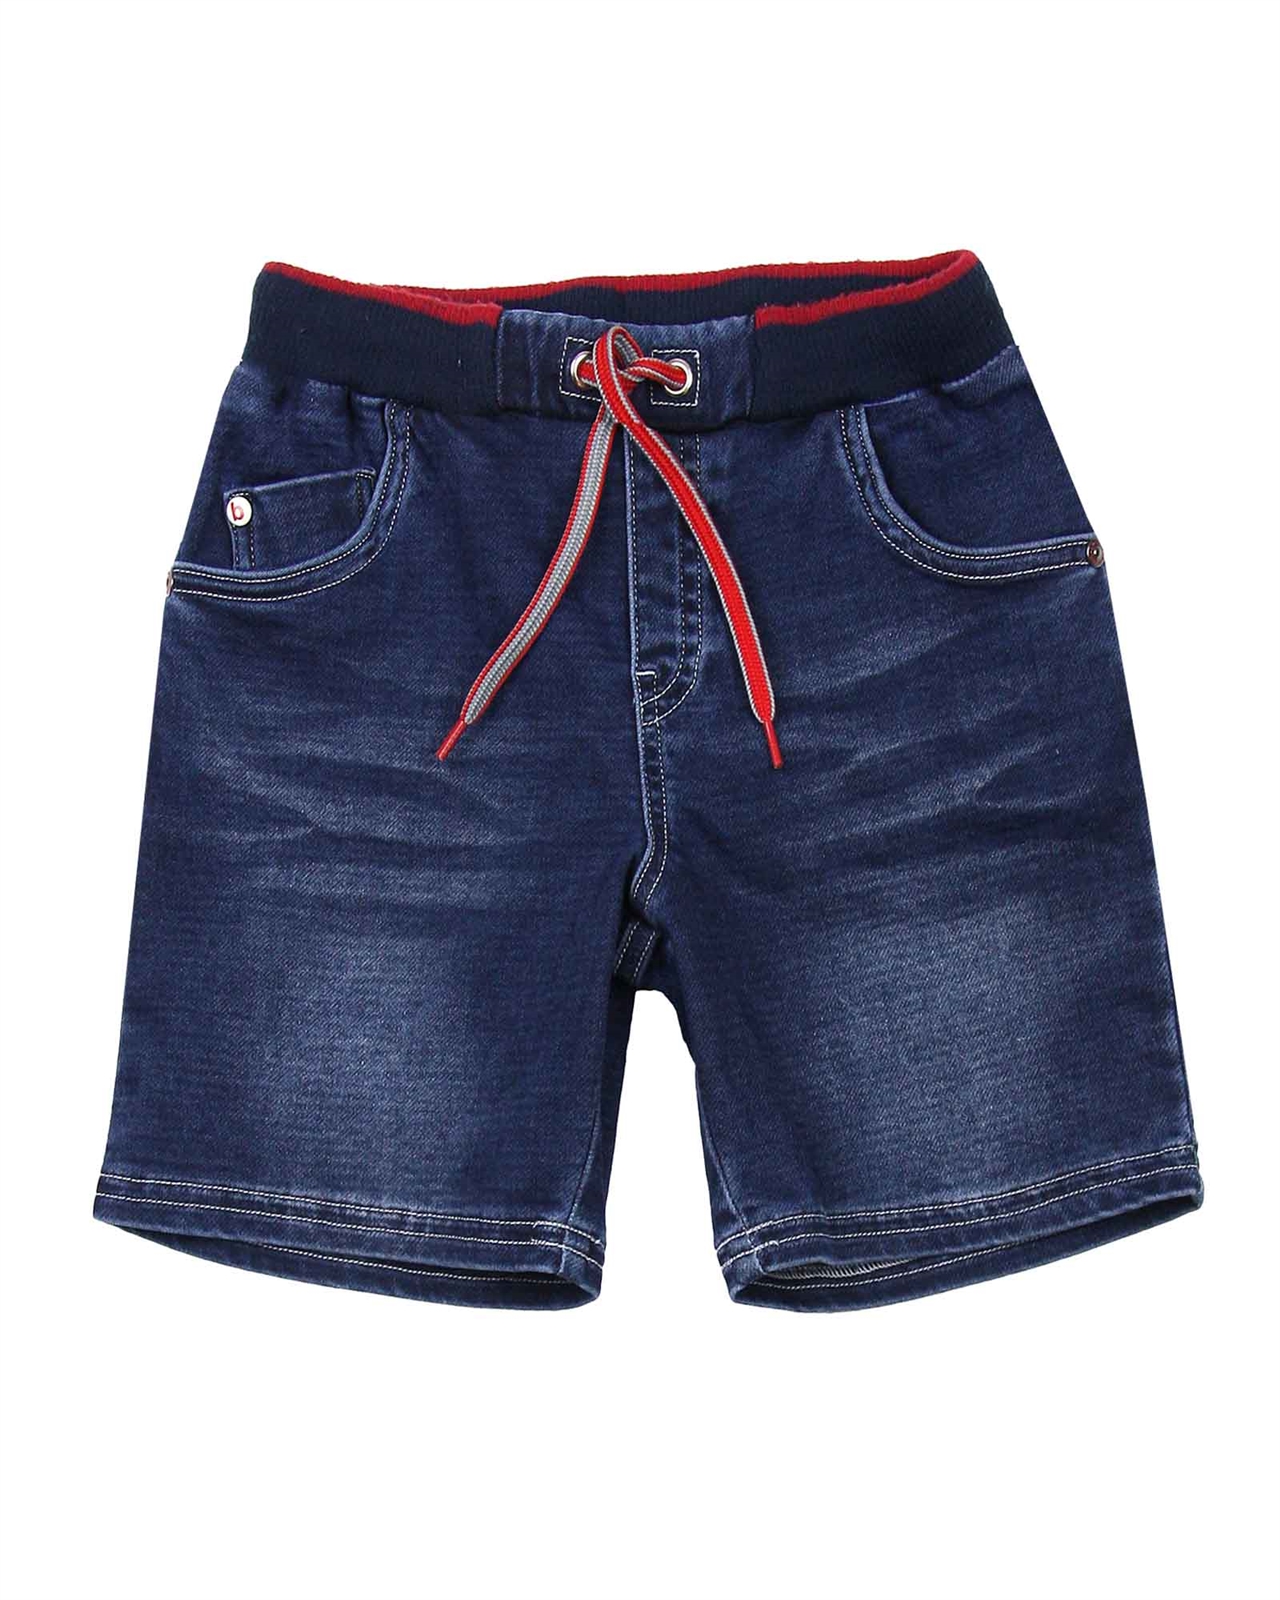 blue jean shorts with elastic waistband